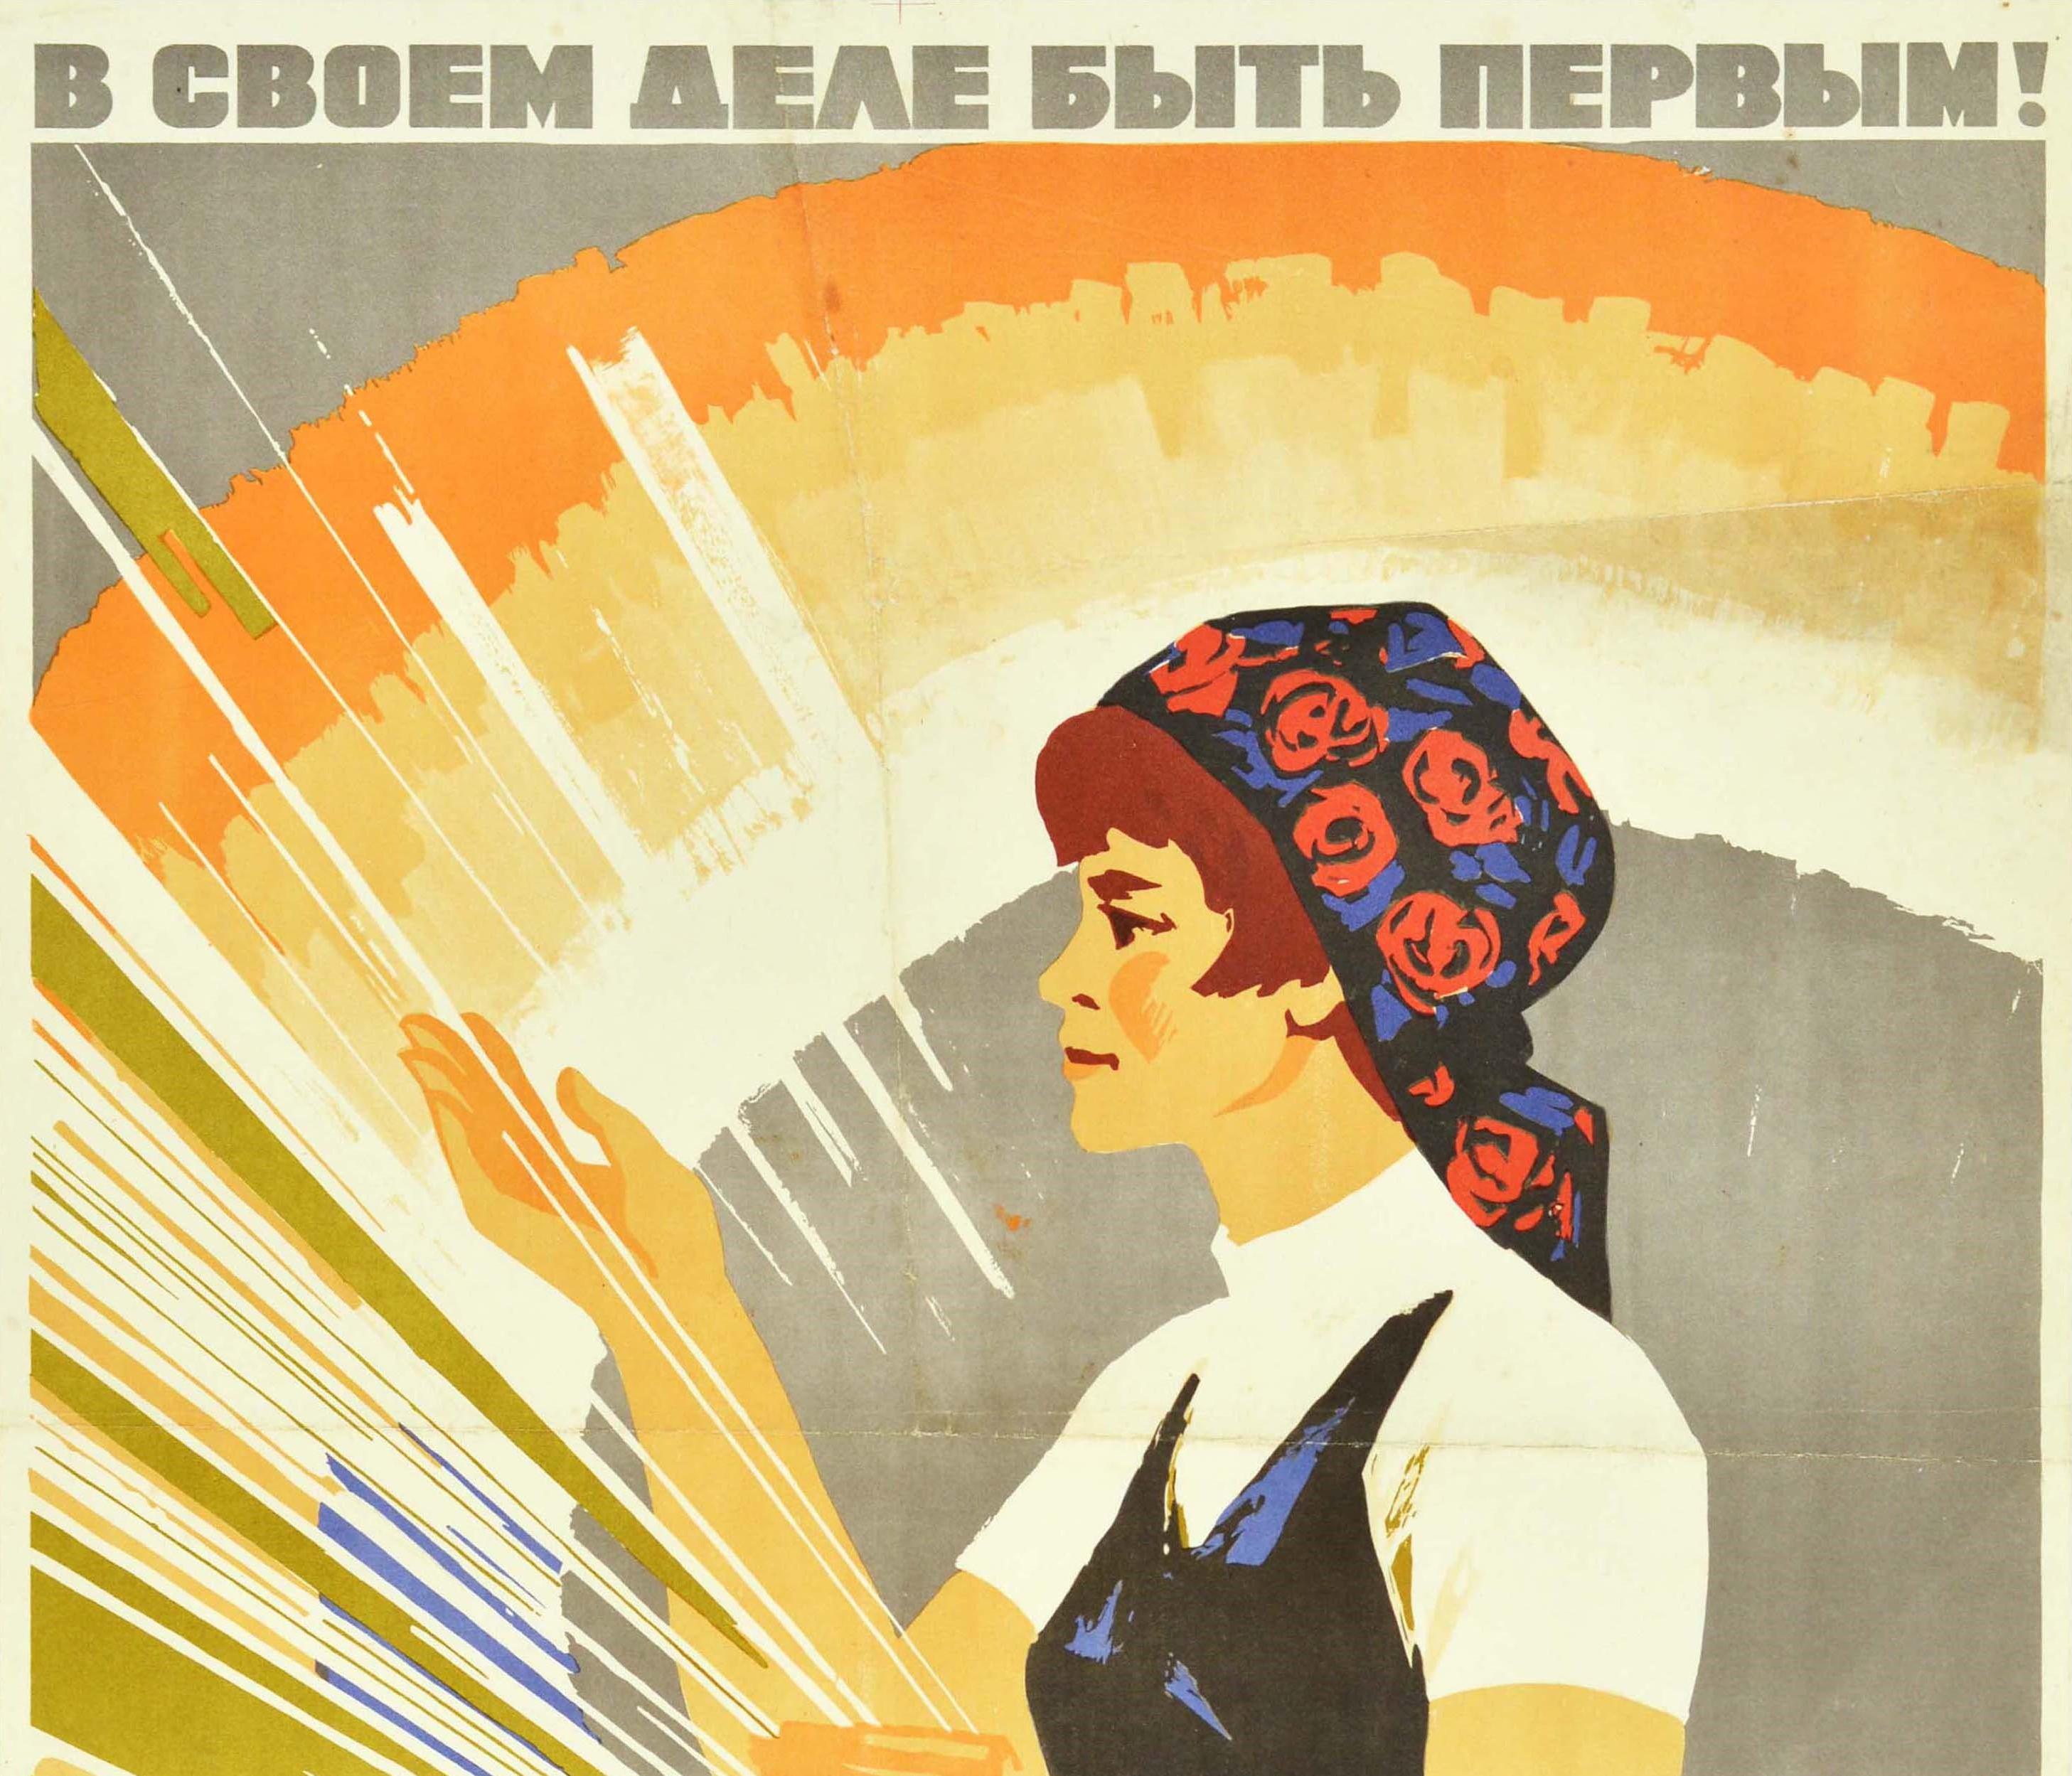 Original vintage Soviet propaganda poster praising textile industry workers - Excel in Your Craft! Textile workers have an honourable duty They give the people good quality fabric! - featuring a dynamic design of a lady weaving cloth with the